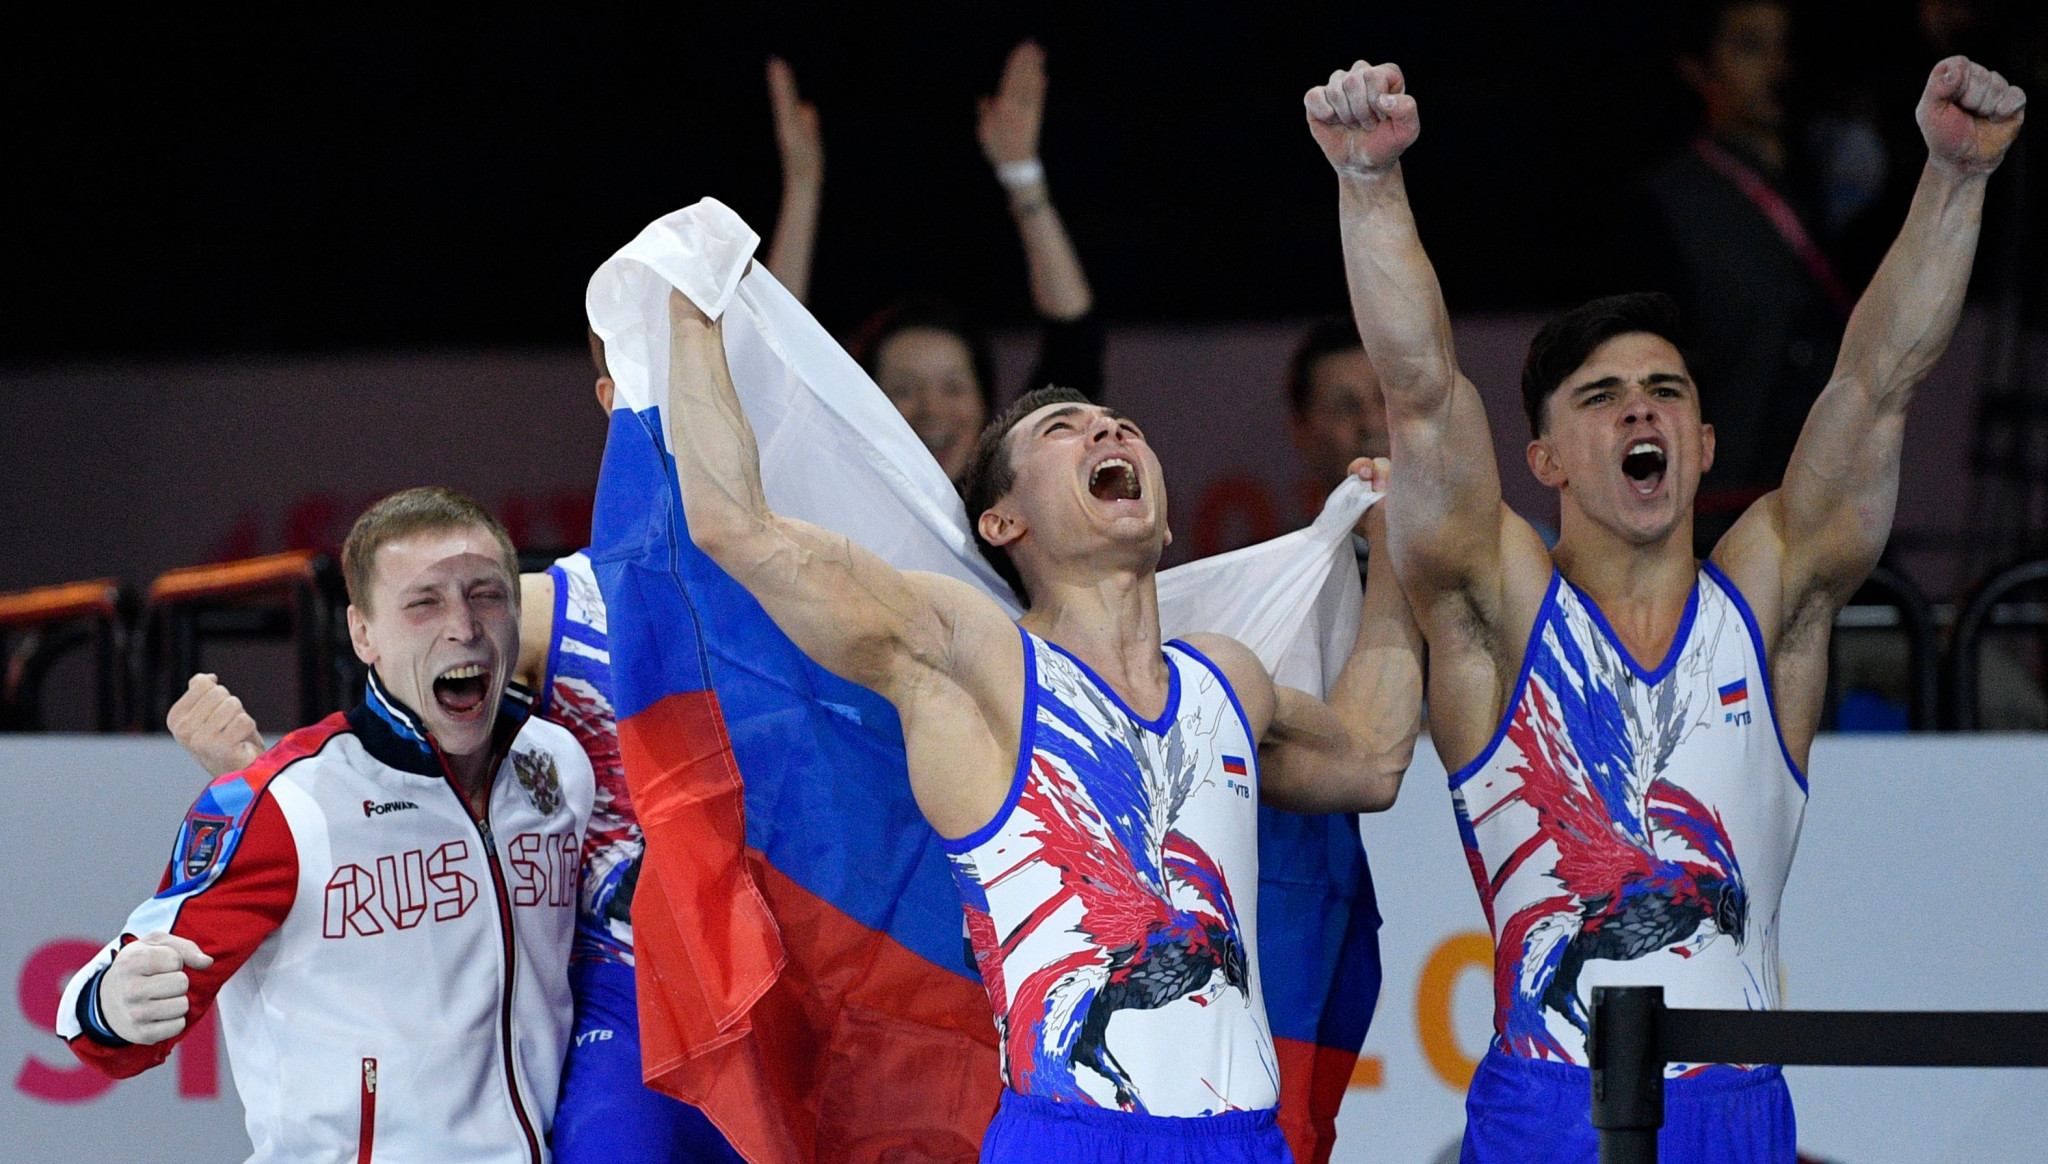 The Russian men's gymnastics team celebrate victory in Stuttgart ©Getty Images